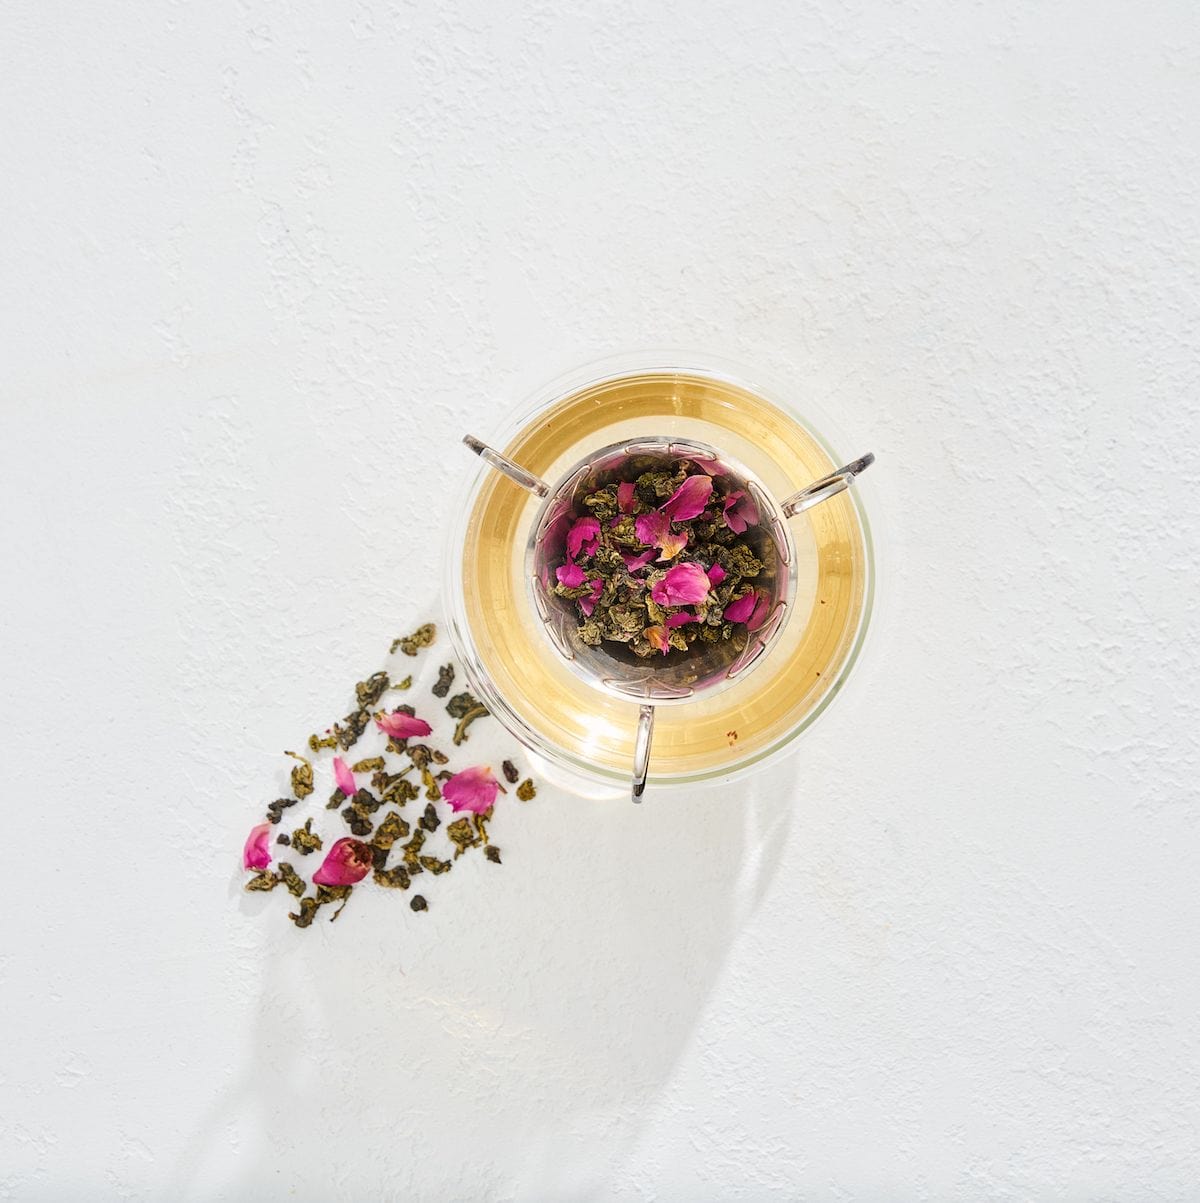 A glass teacup filled with light-colored tea and rose petals sits on a white surface. Loose leaf Magnolia Rose Oolong Tea and rose petals are scattered next to the cup, evoking the serene ambiance of a Magic Hour ritual.